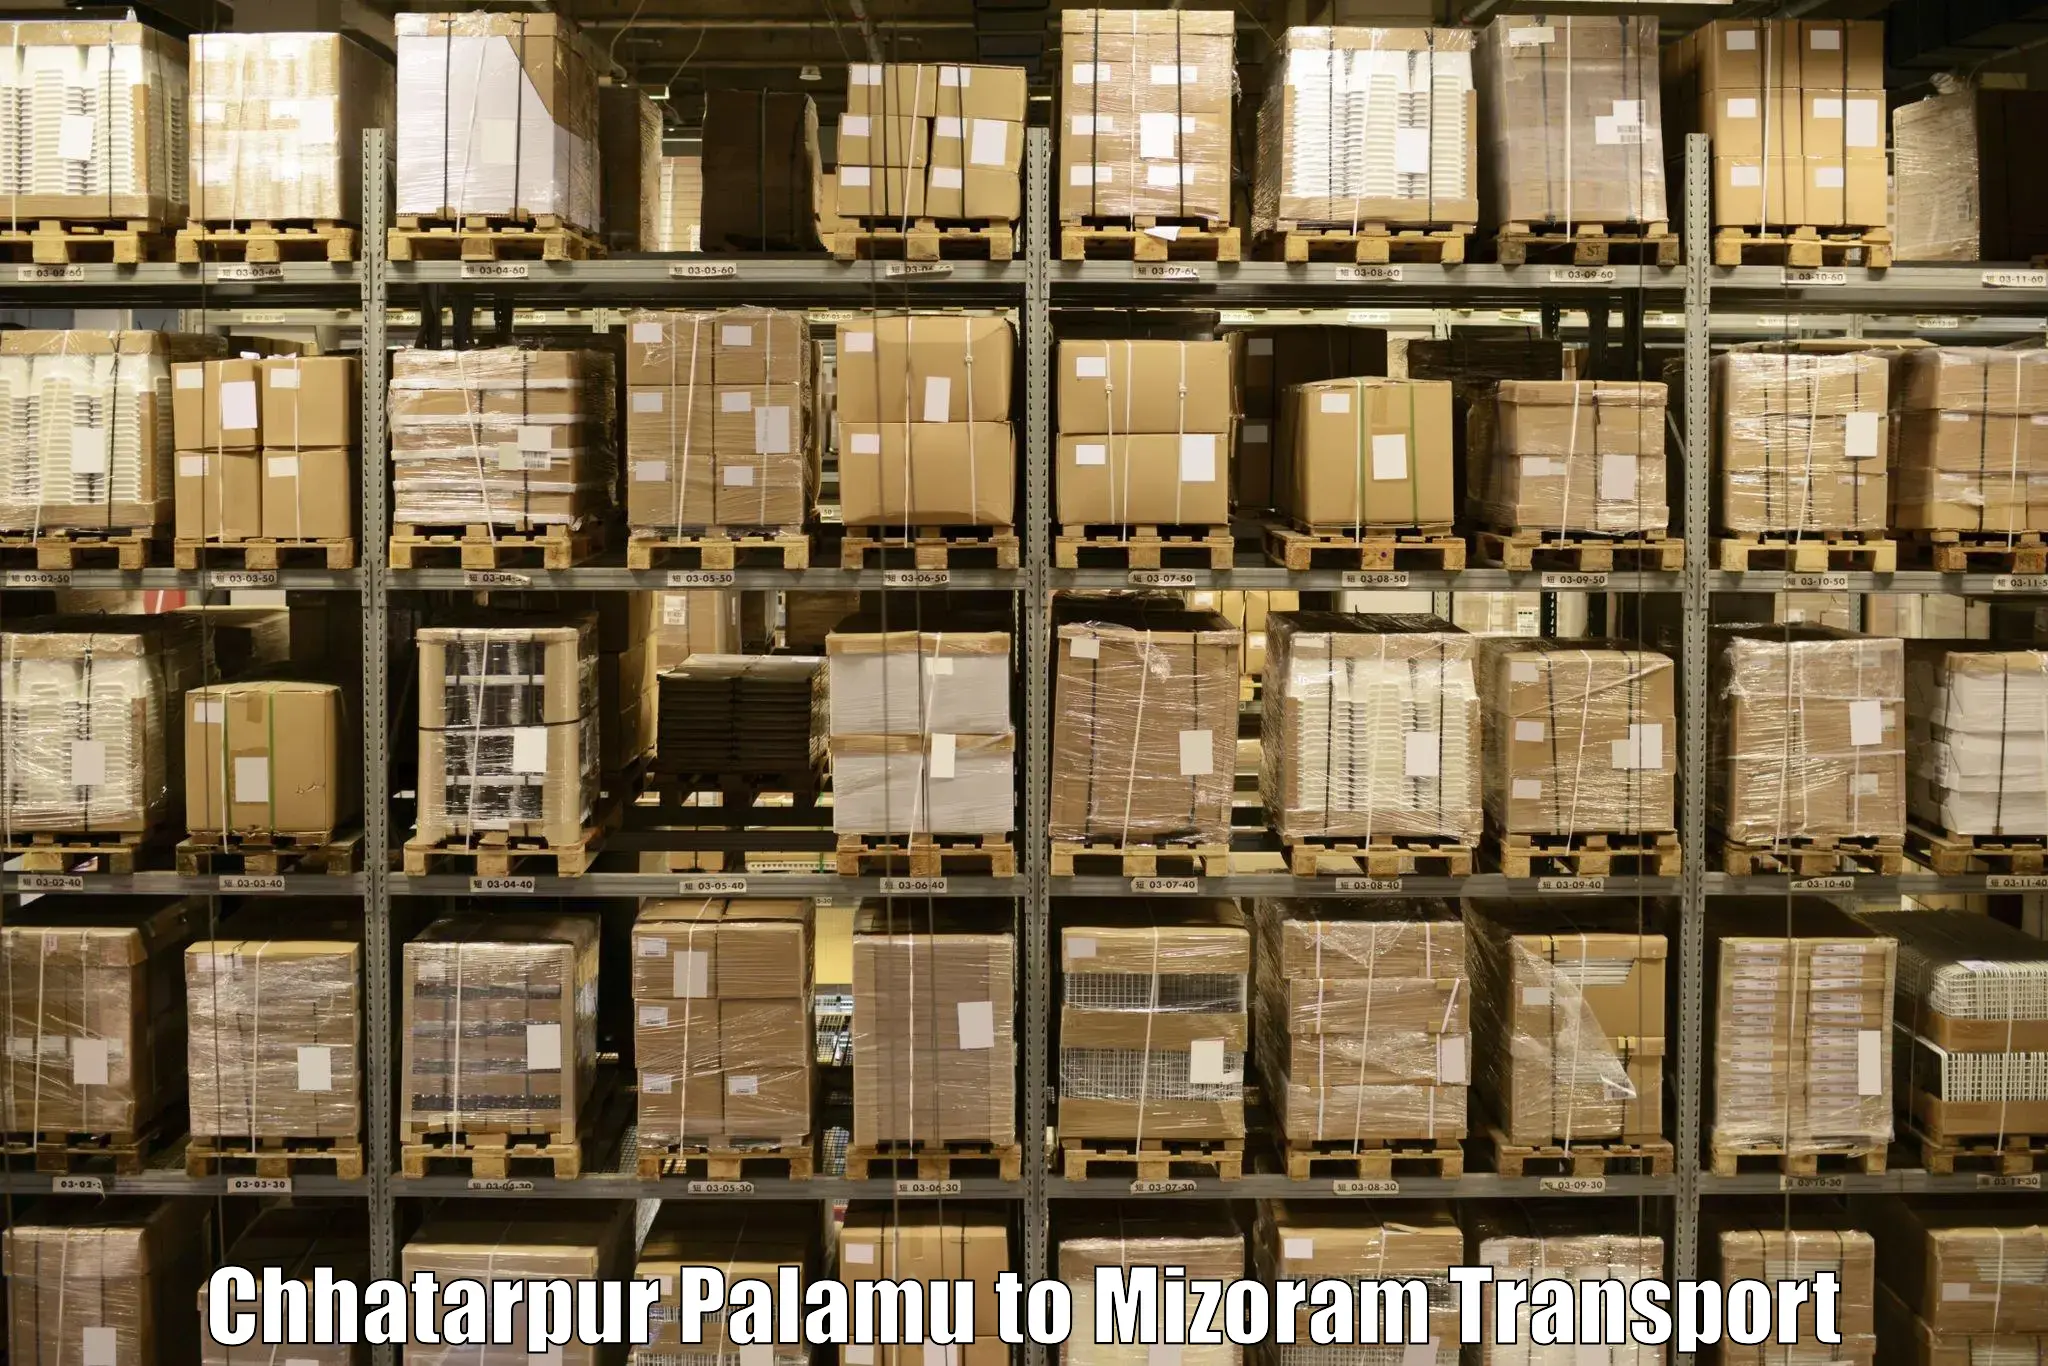 Road transport online services in Chhatarpur Palamu to Siaha